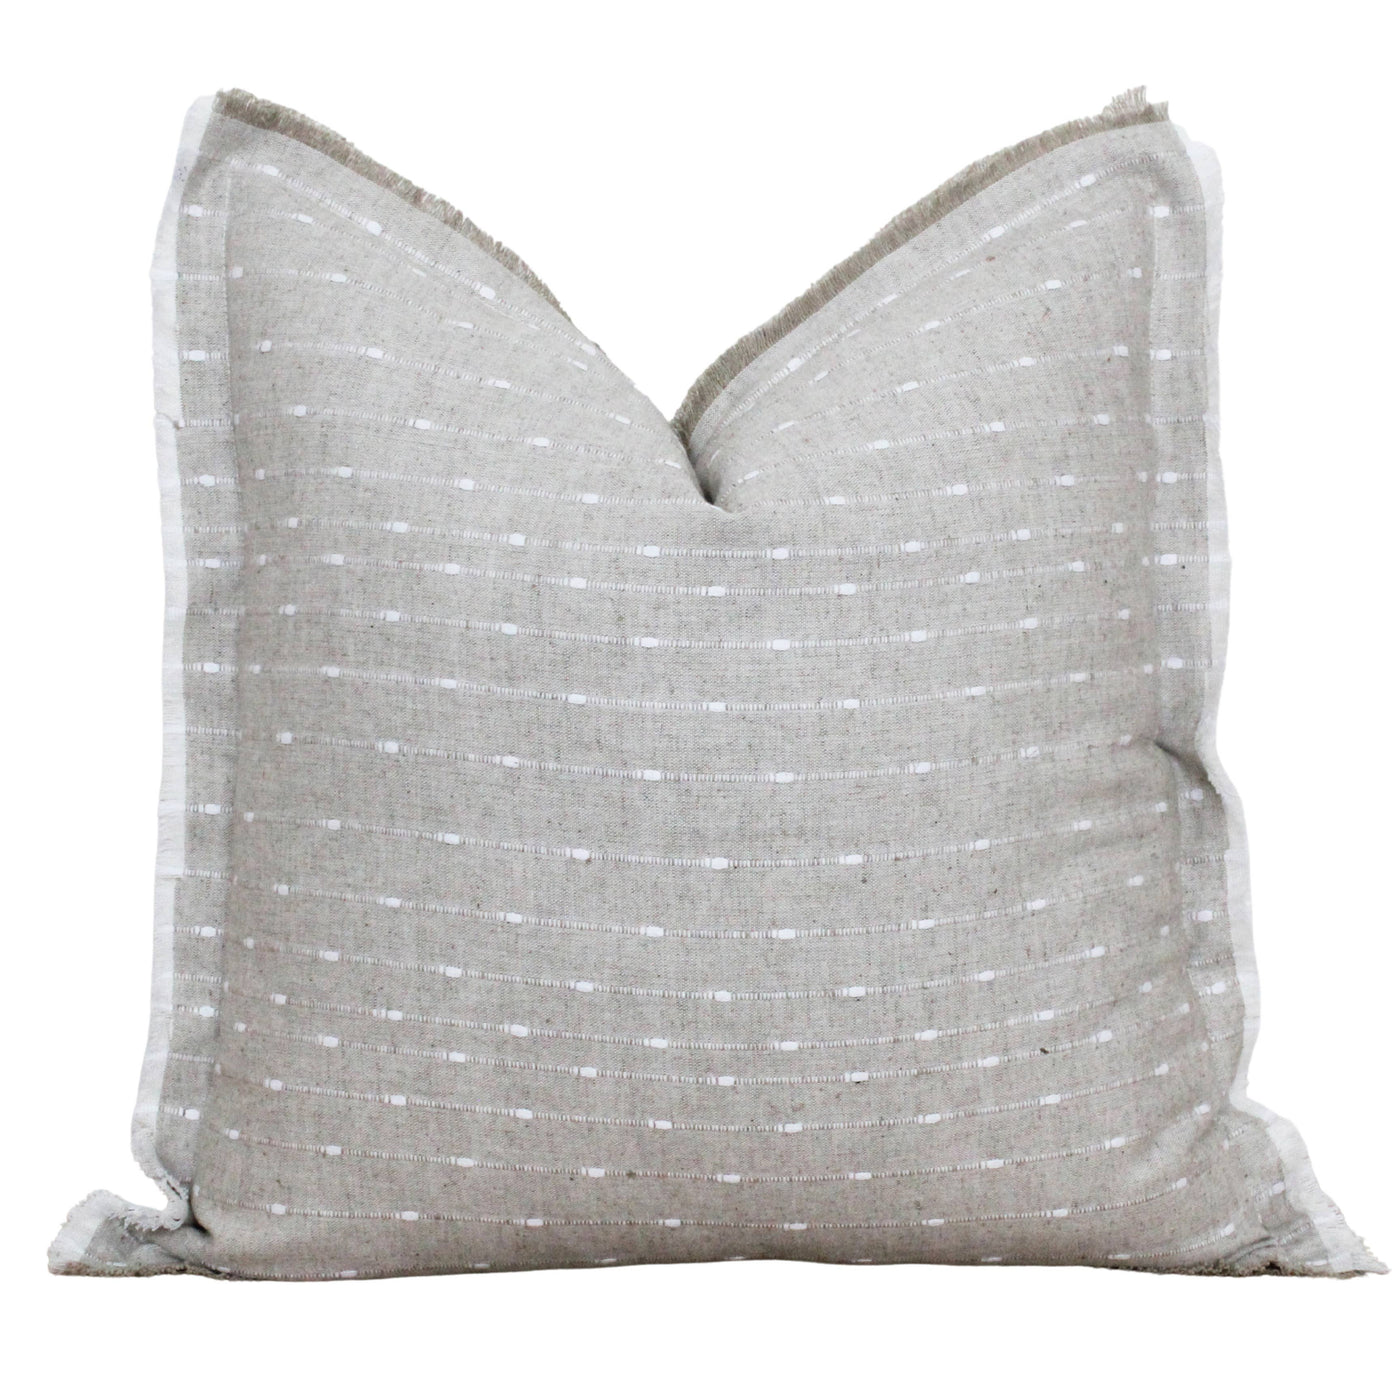 Dotted Fringe Pillow, Natural 20"